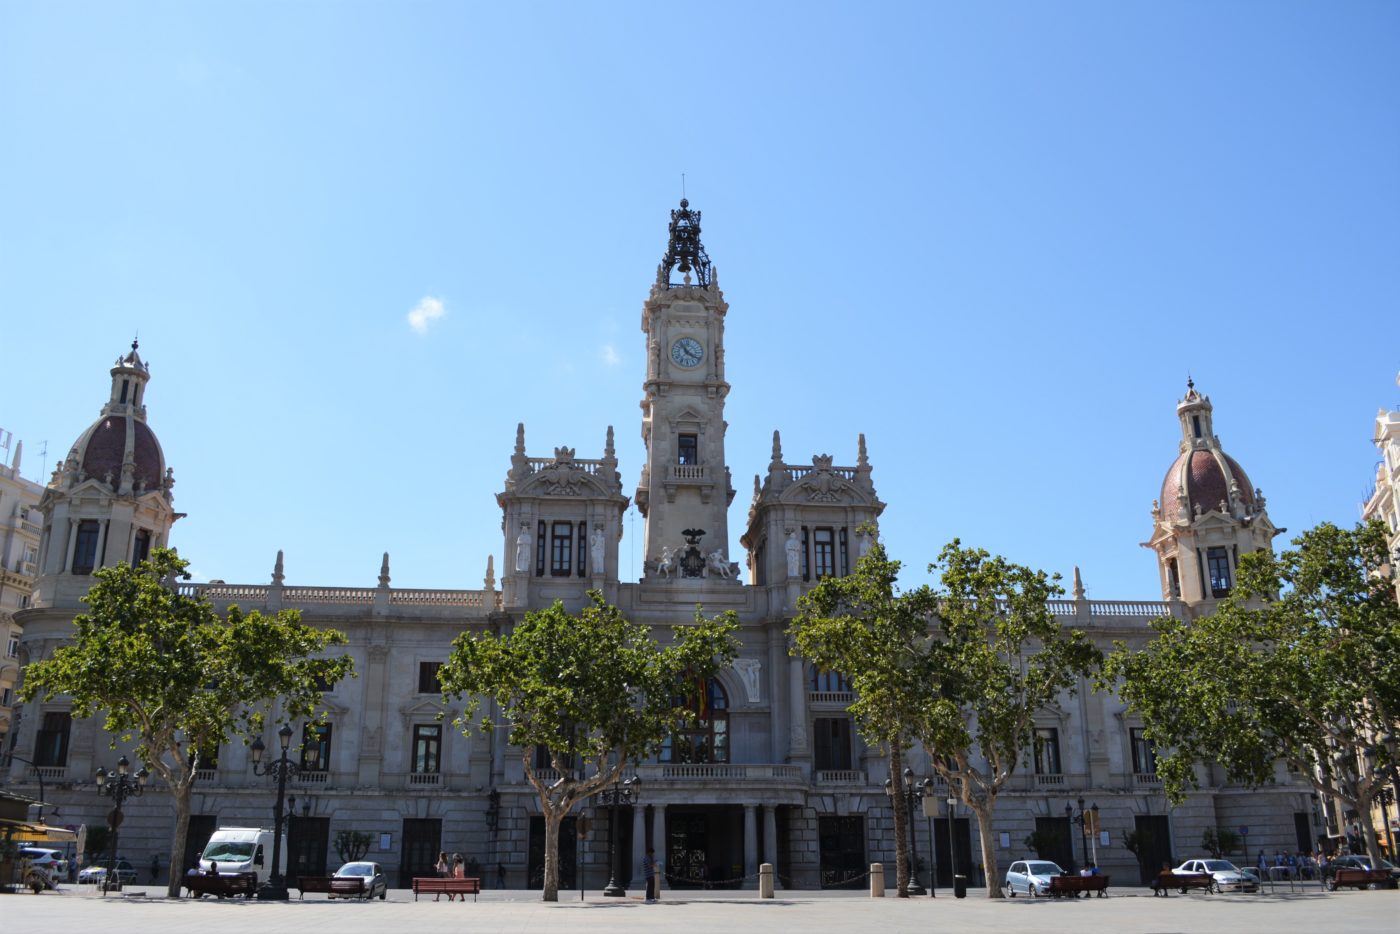 Sunday City Guide: What to Do in Valencia, Spain